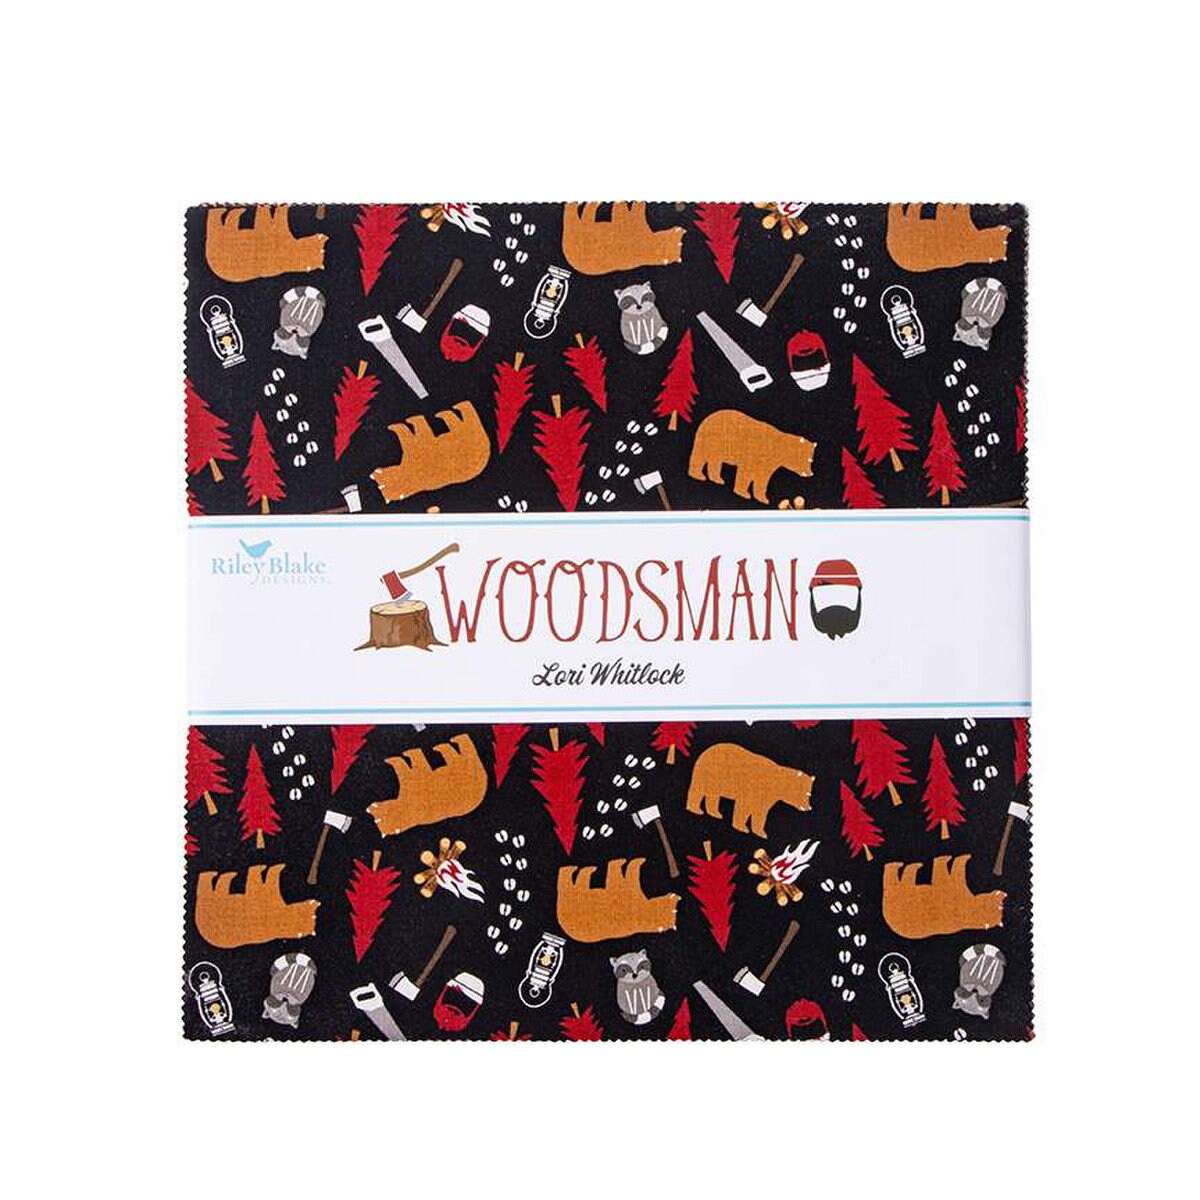 Woodsman 10" Stacker Layer Cake - Riley Blake Designs 10-13760-42, Outdoors Themed Fabric Layer Cake, Masculine Themed Forest Layer Cake